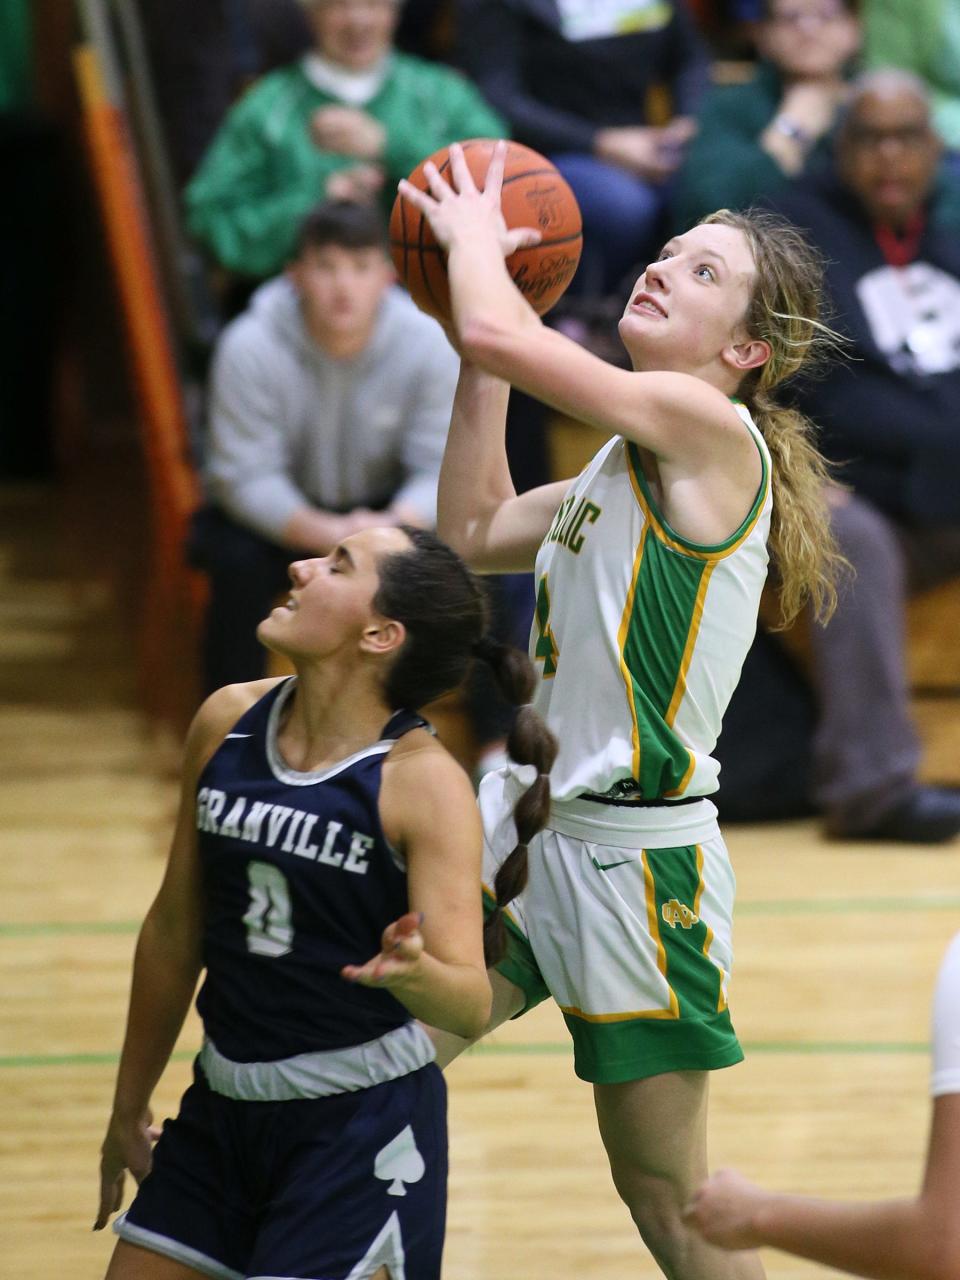 Newark Catholic's Kylie Gibson was named to the All-Ohio Division IV first team on Monday.